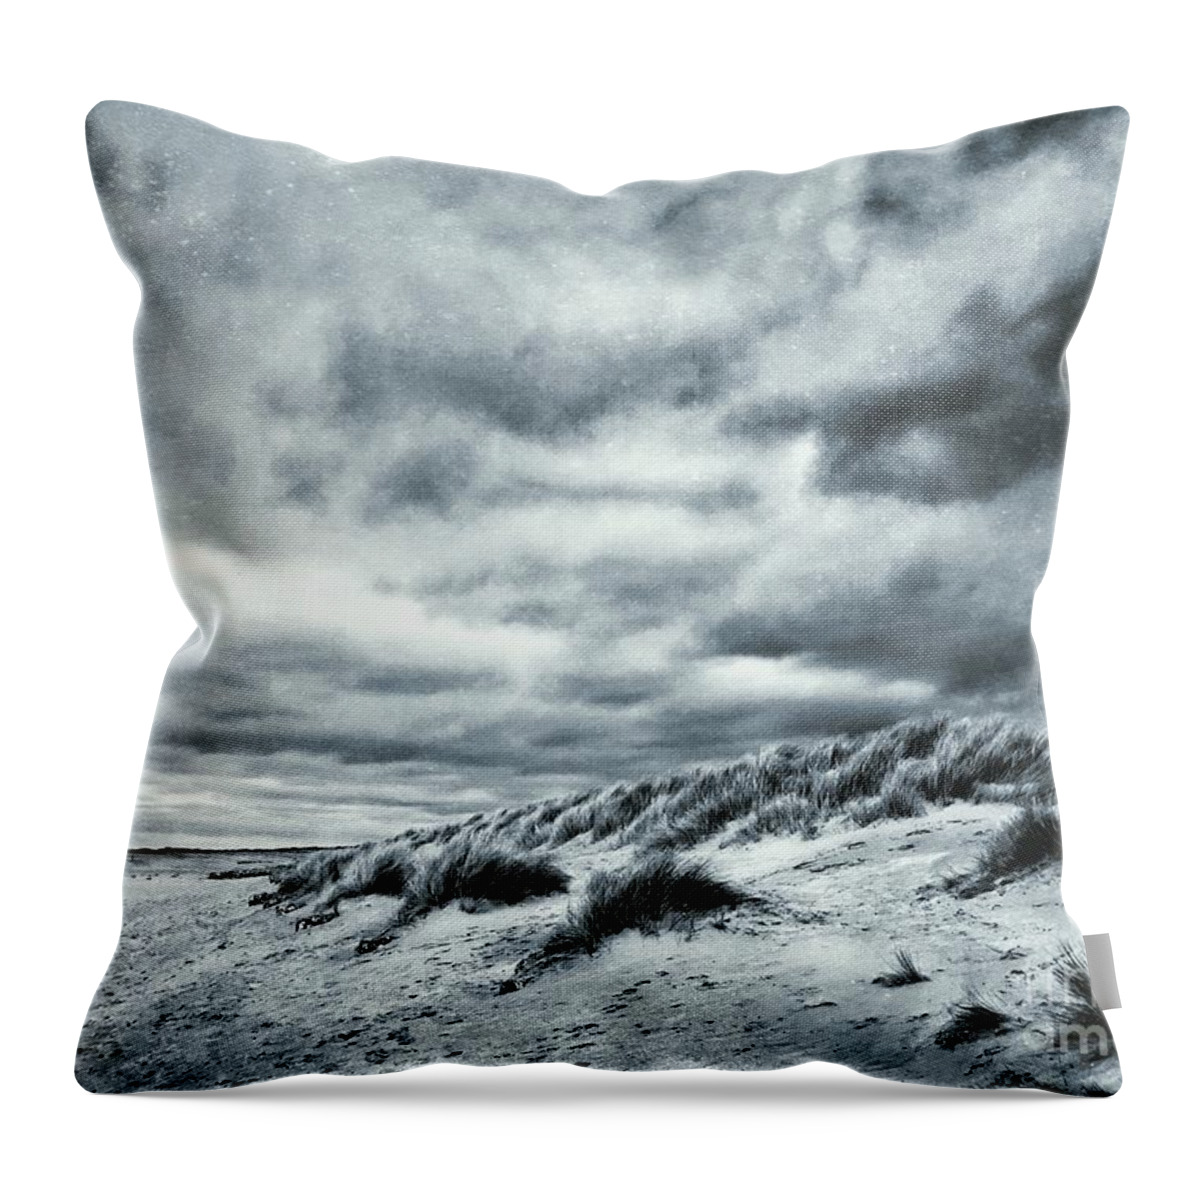 North Sea Throw Pillow featuring the digital art Frosted shore by John Edwards